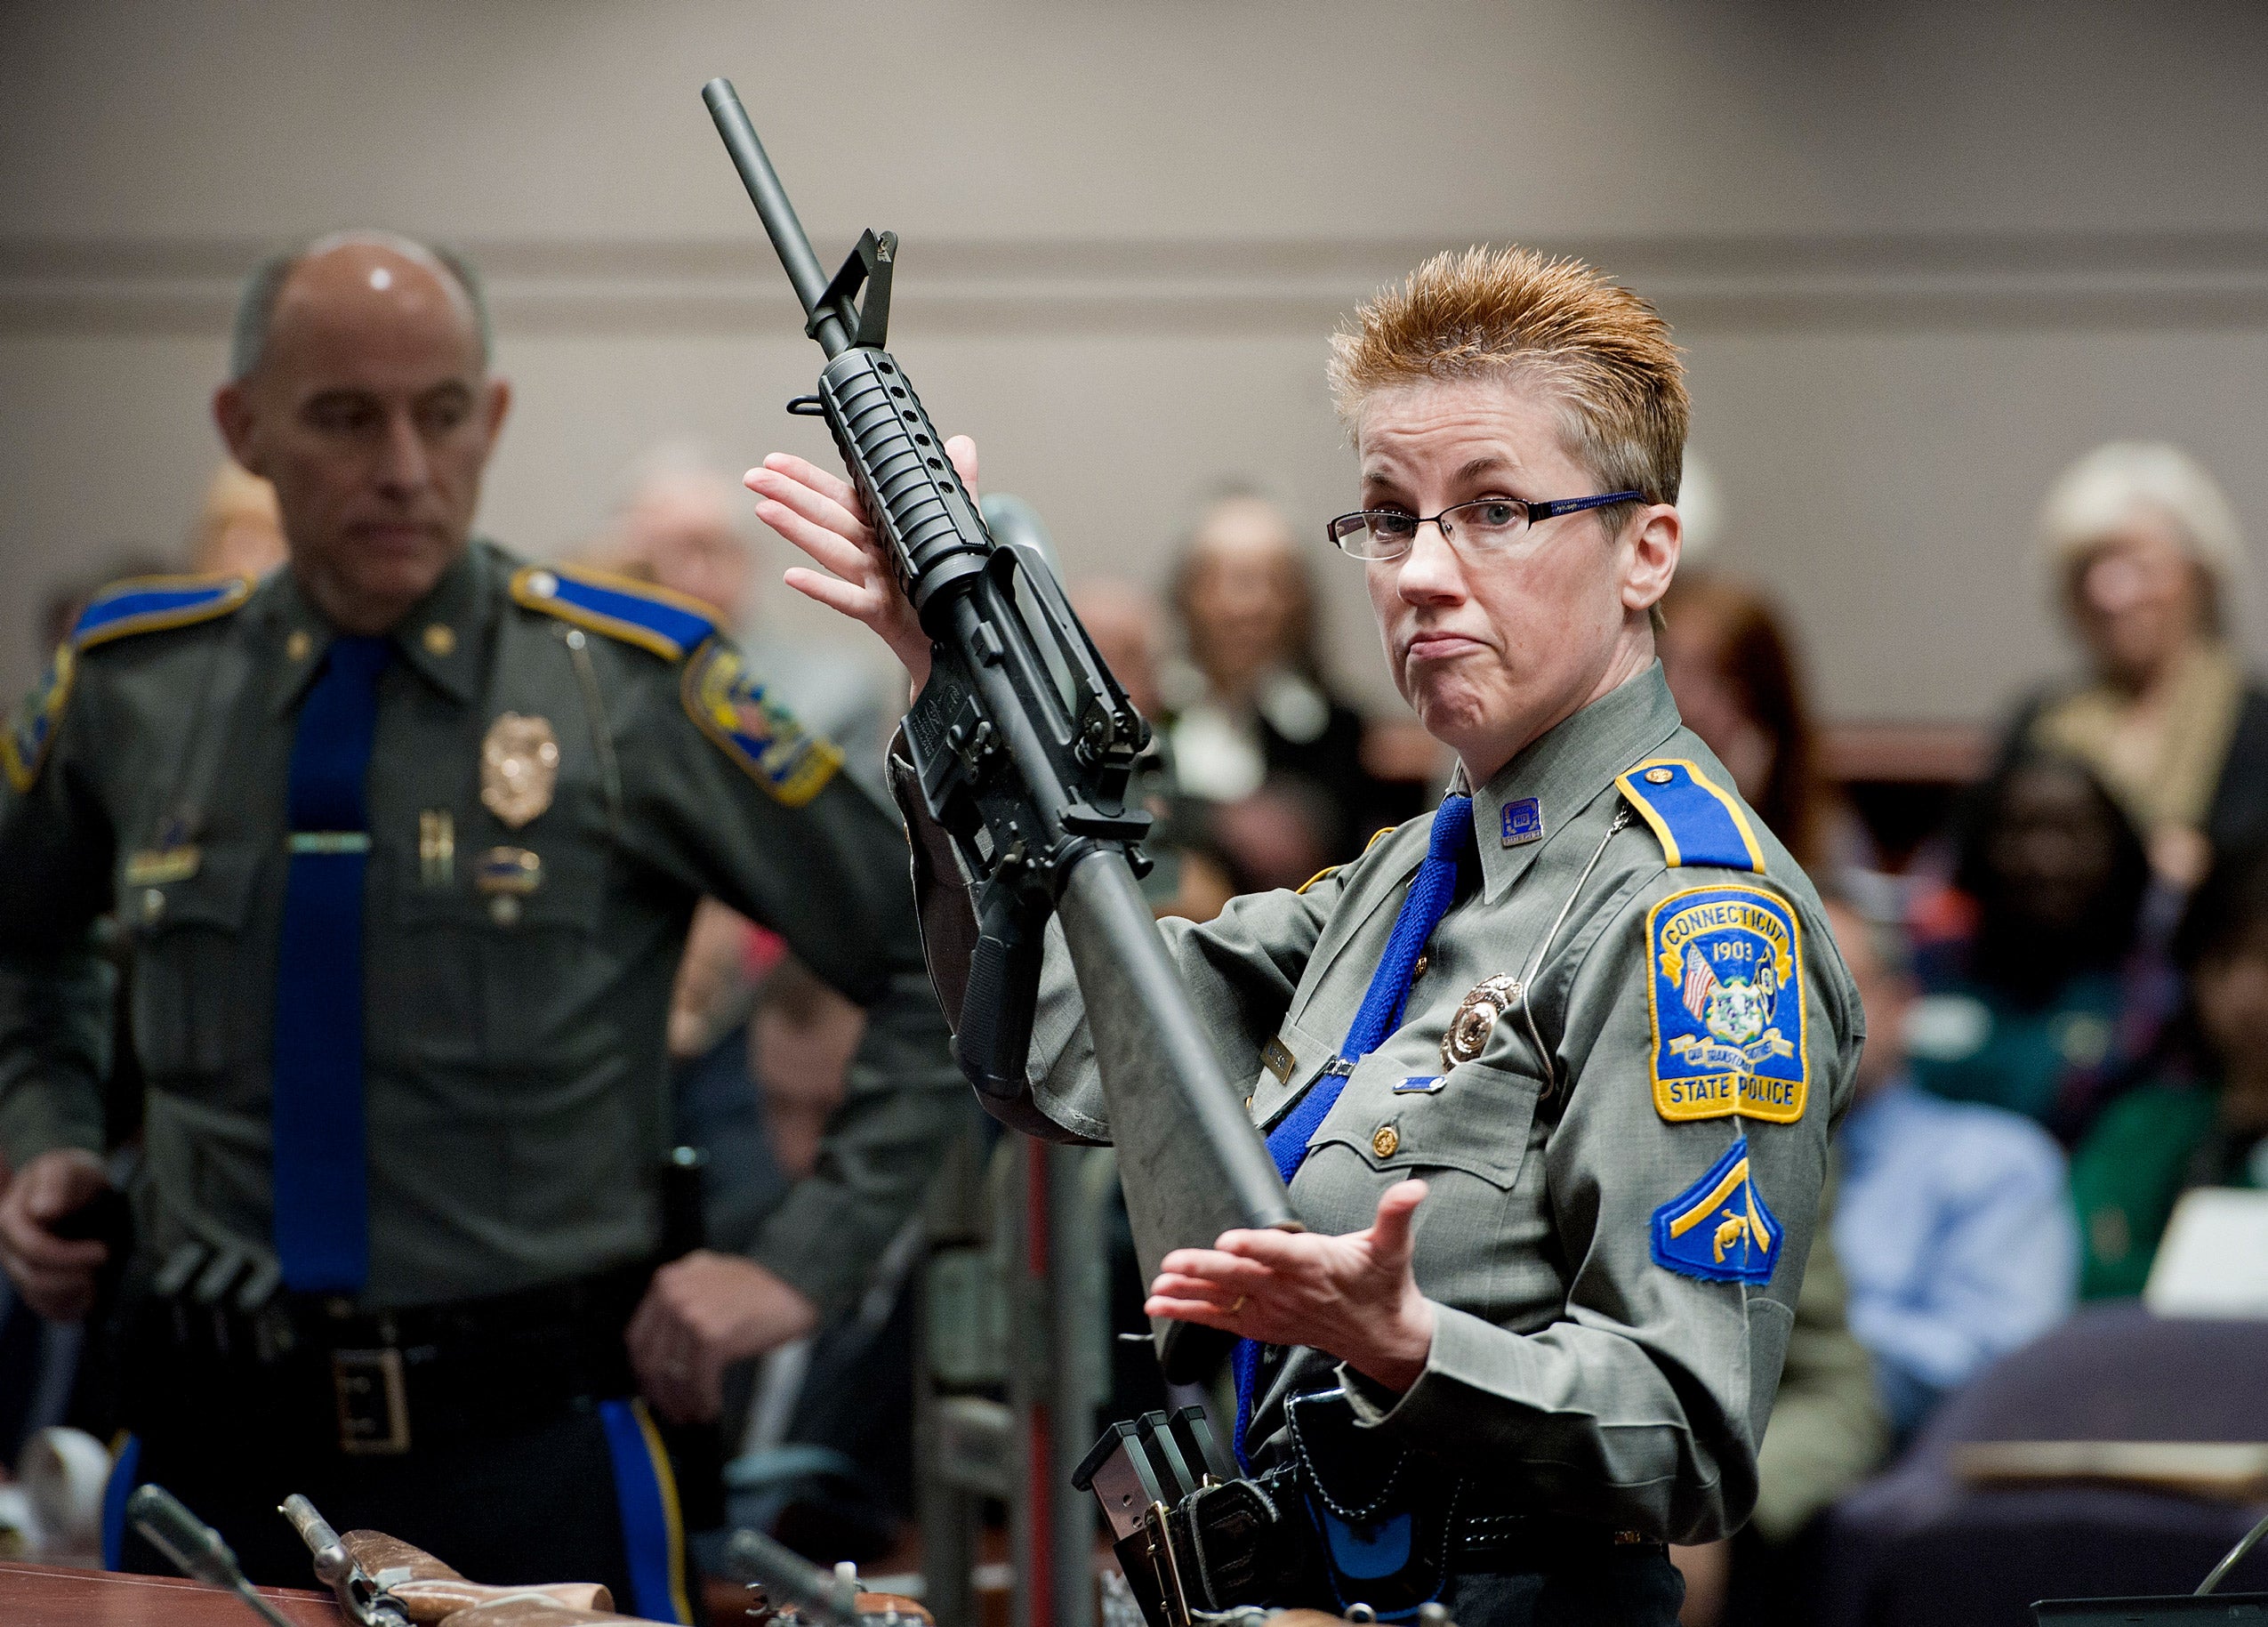 Police officer displaying a rifle in a courtroom.